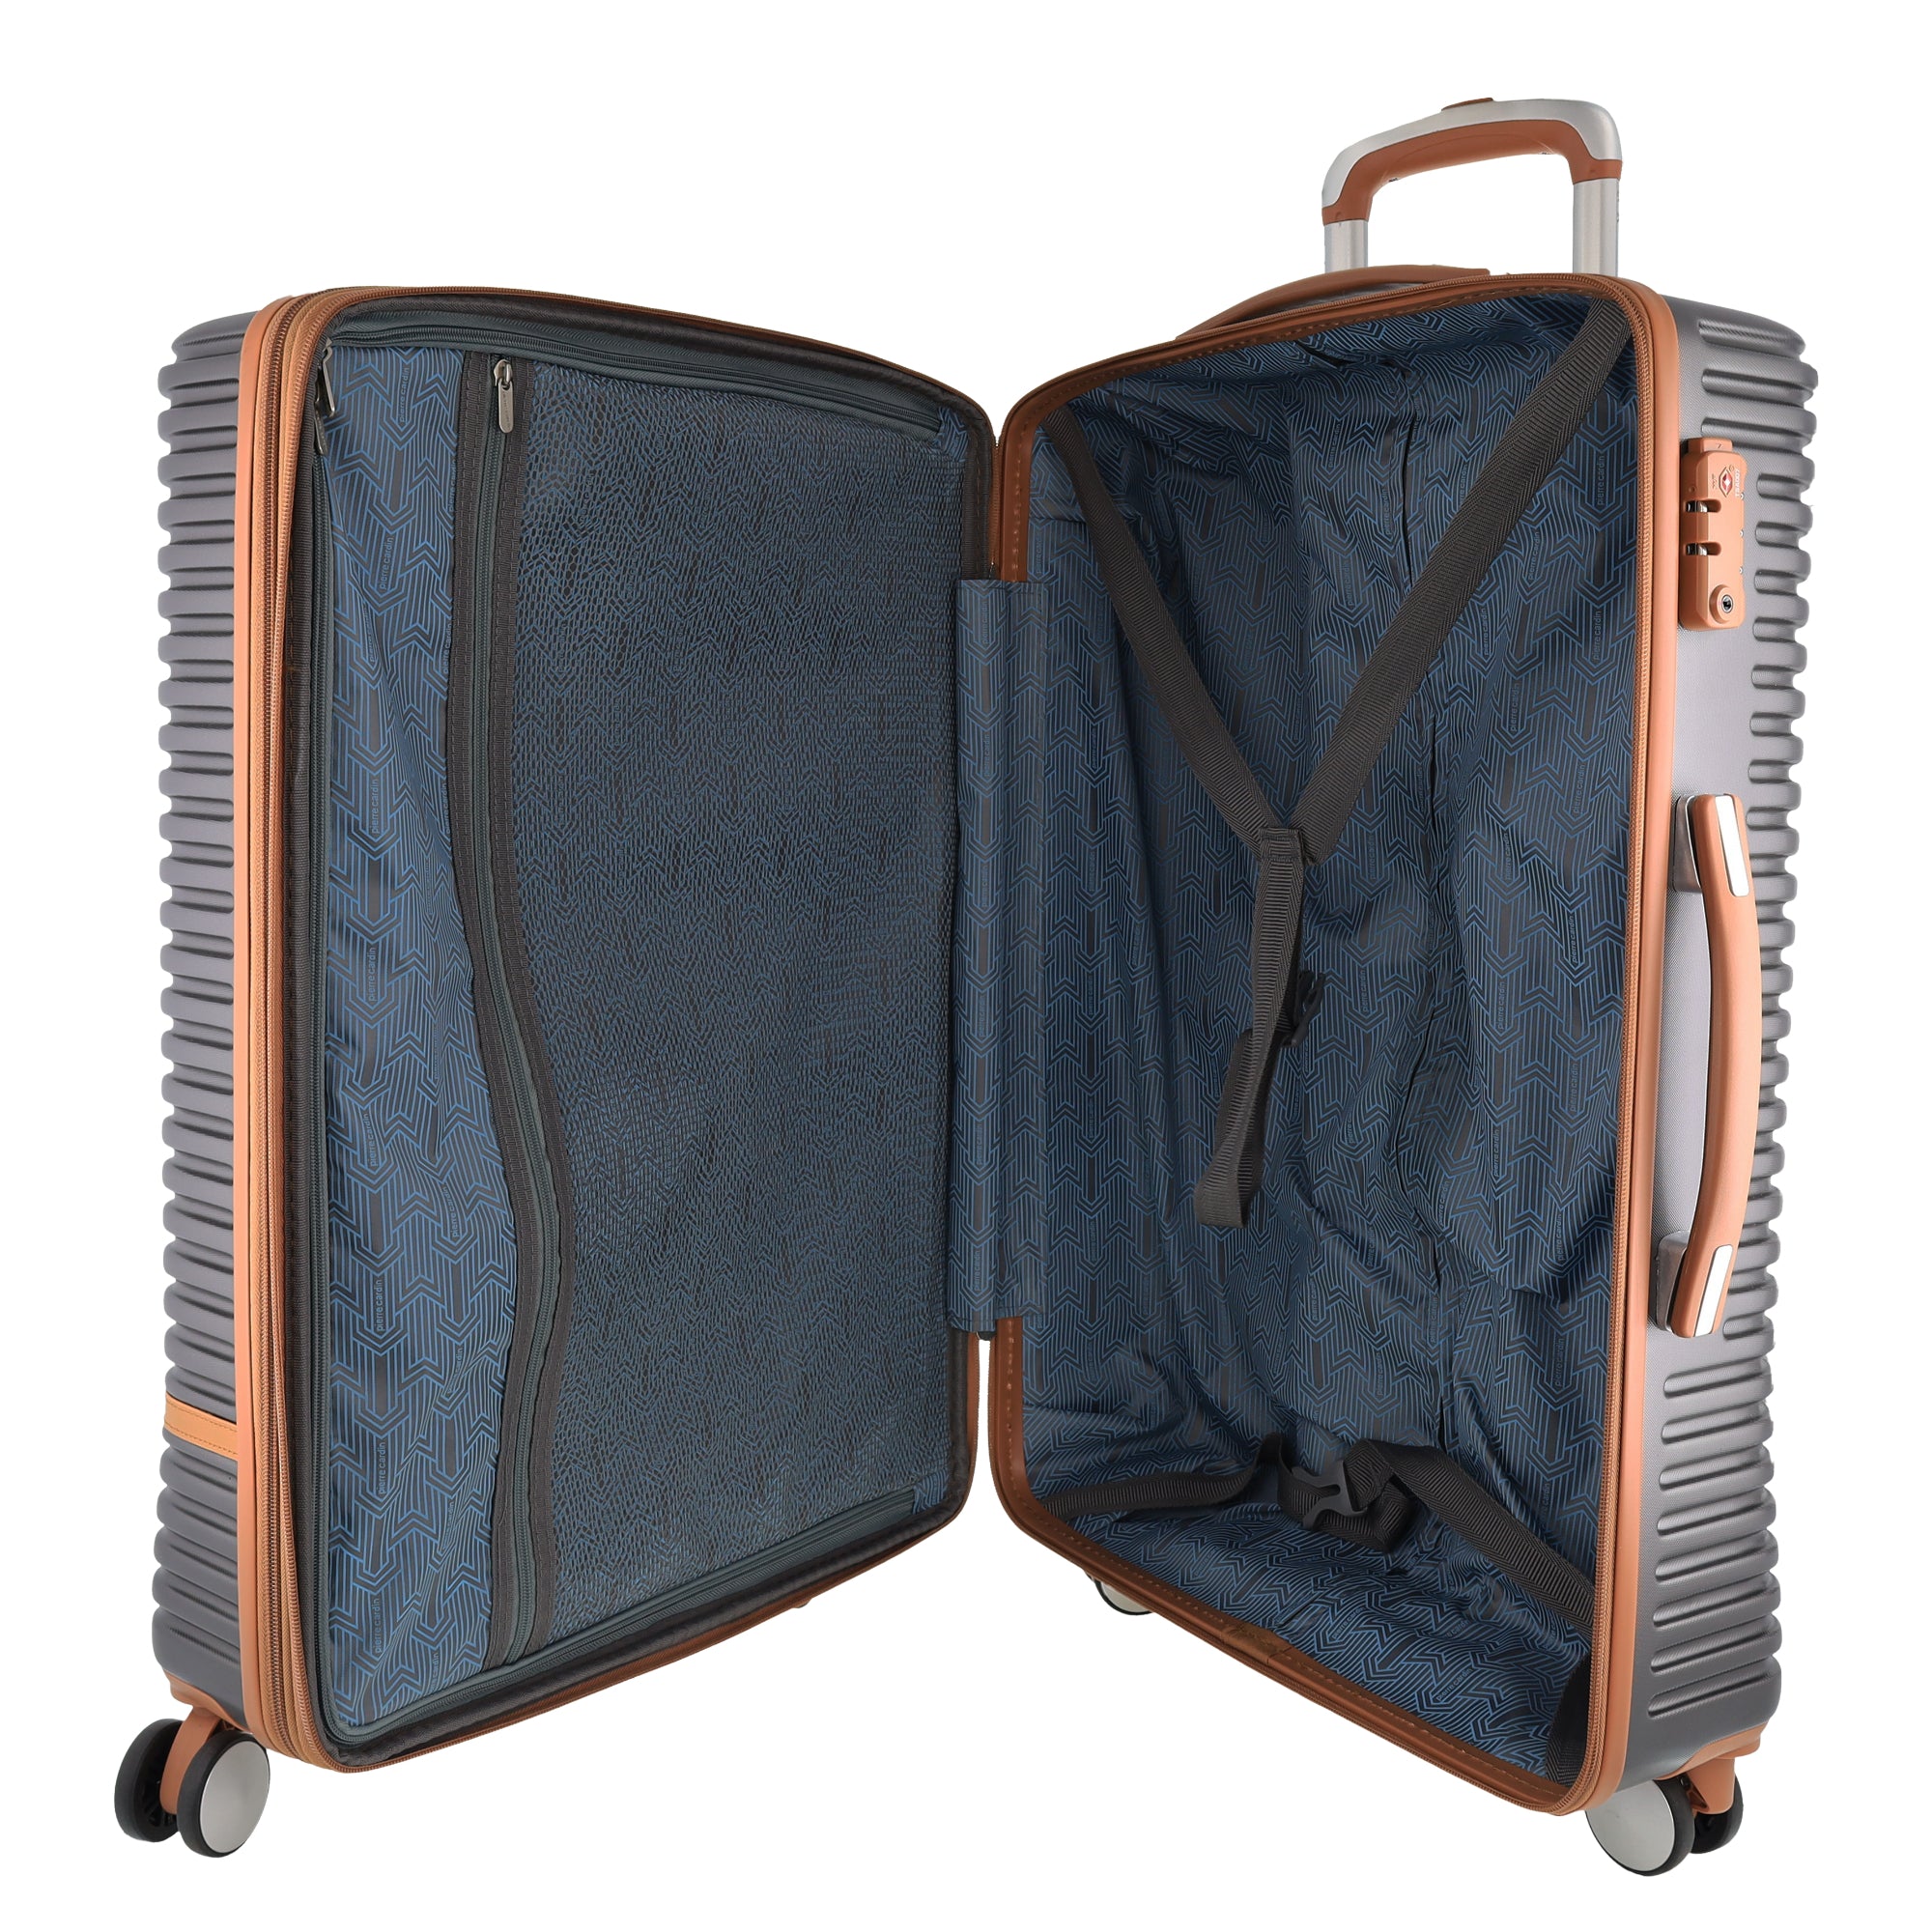 Pierre Cardin 70cm MEDIUM Hard Shell Suitcase in Charcoal